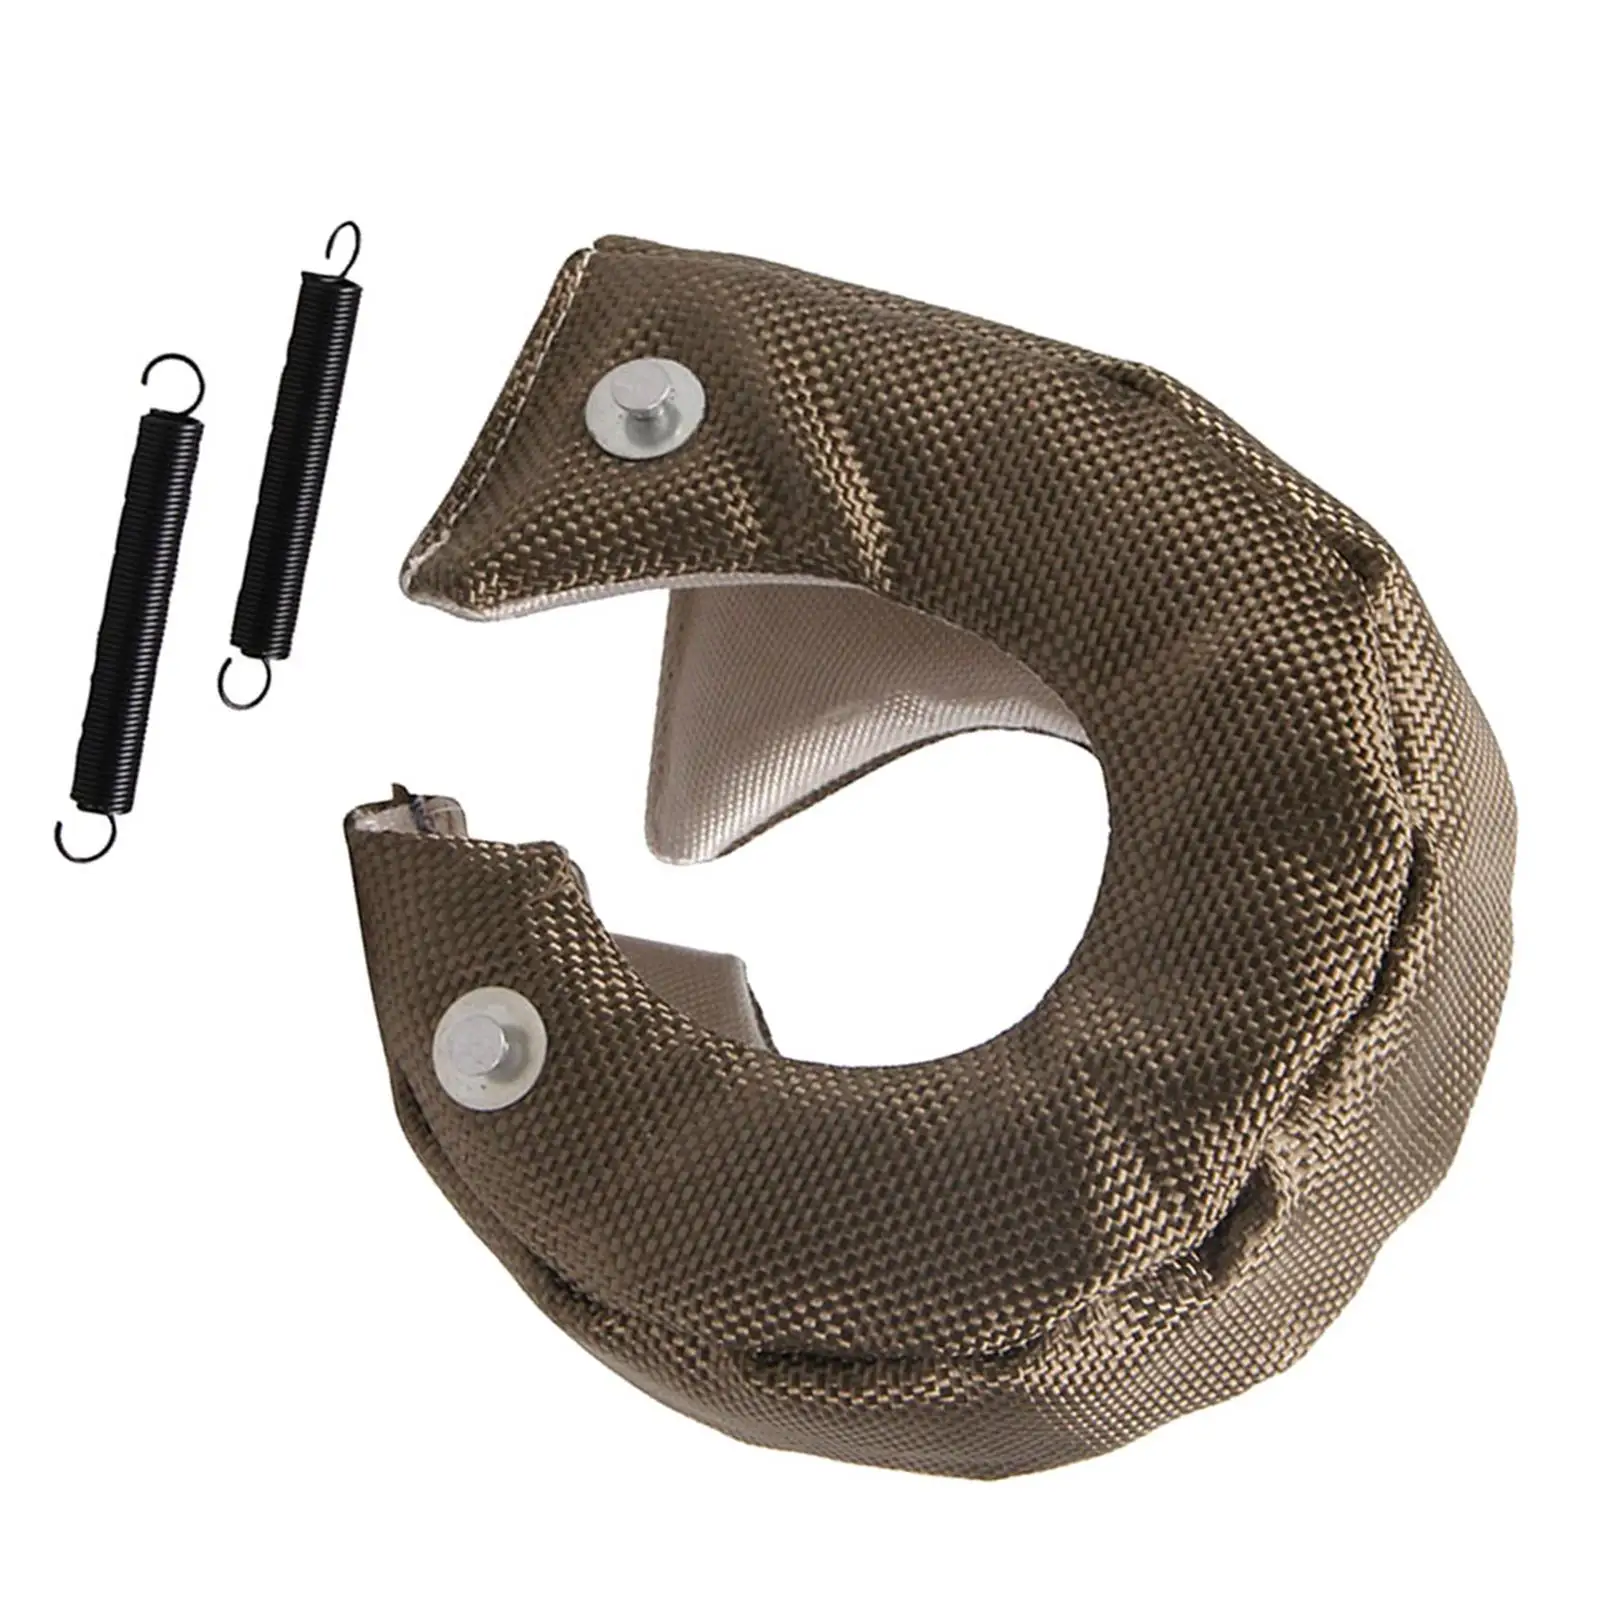 Turbocharger Thermal Heat Shield Cover for T3 Thermal Protection 